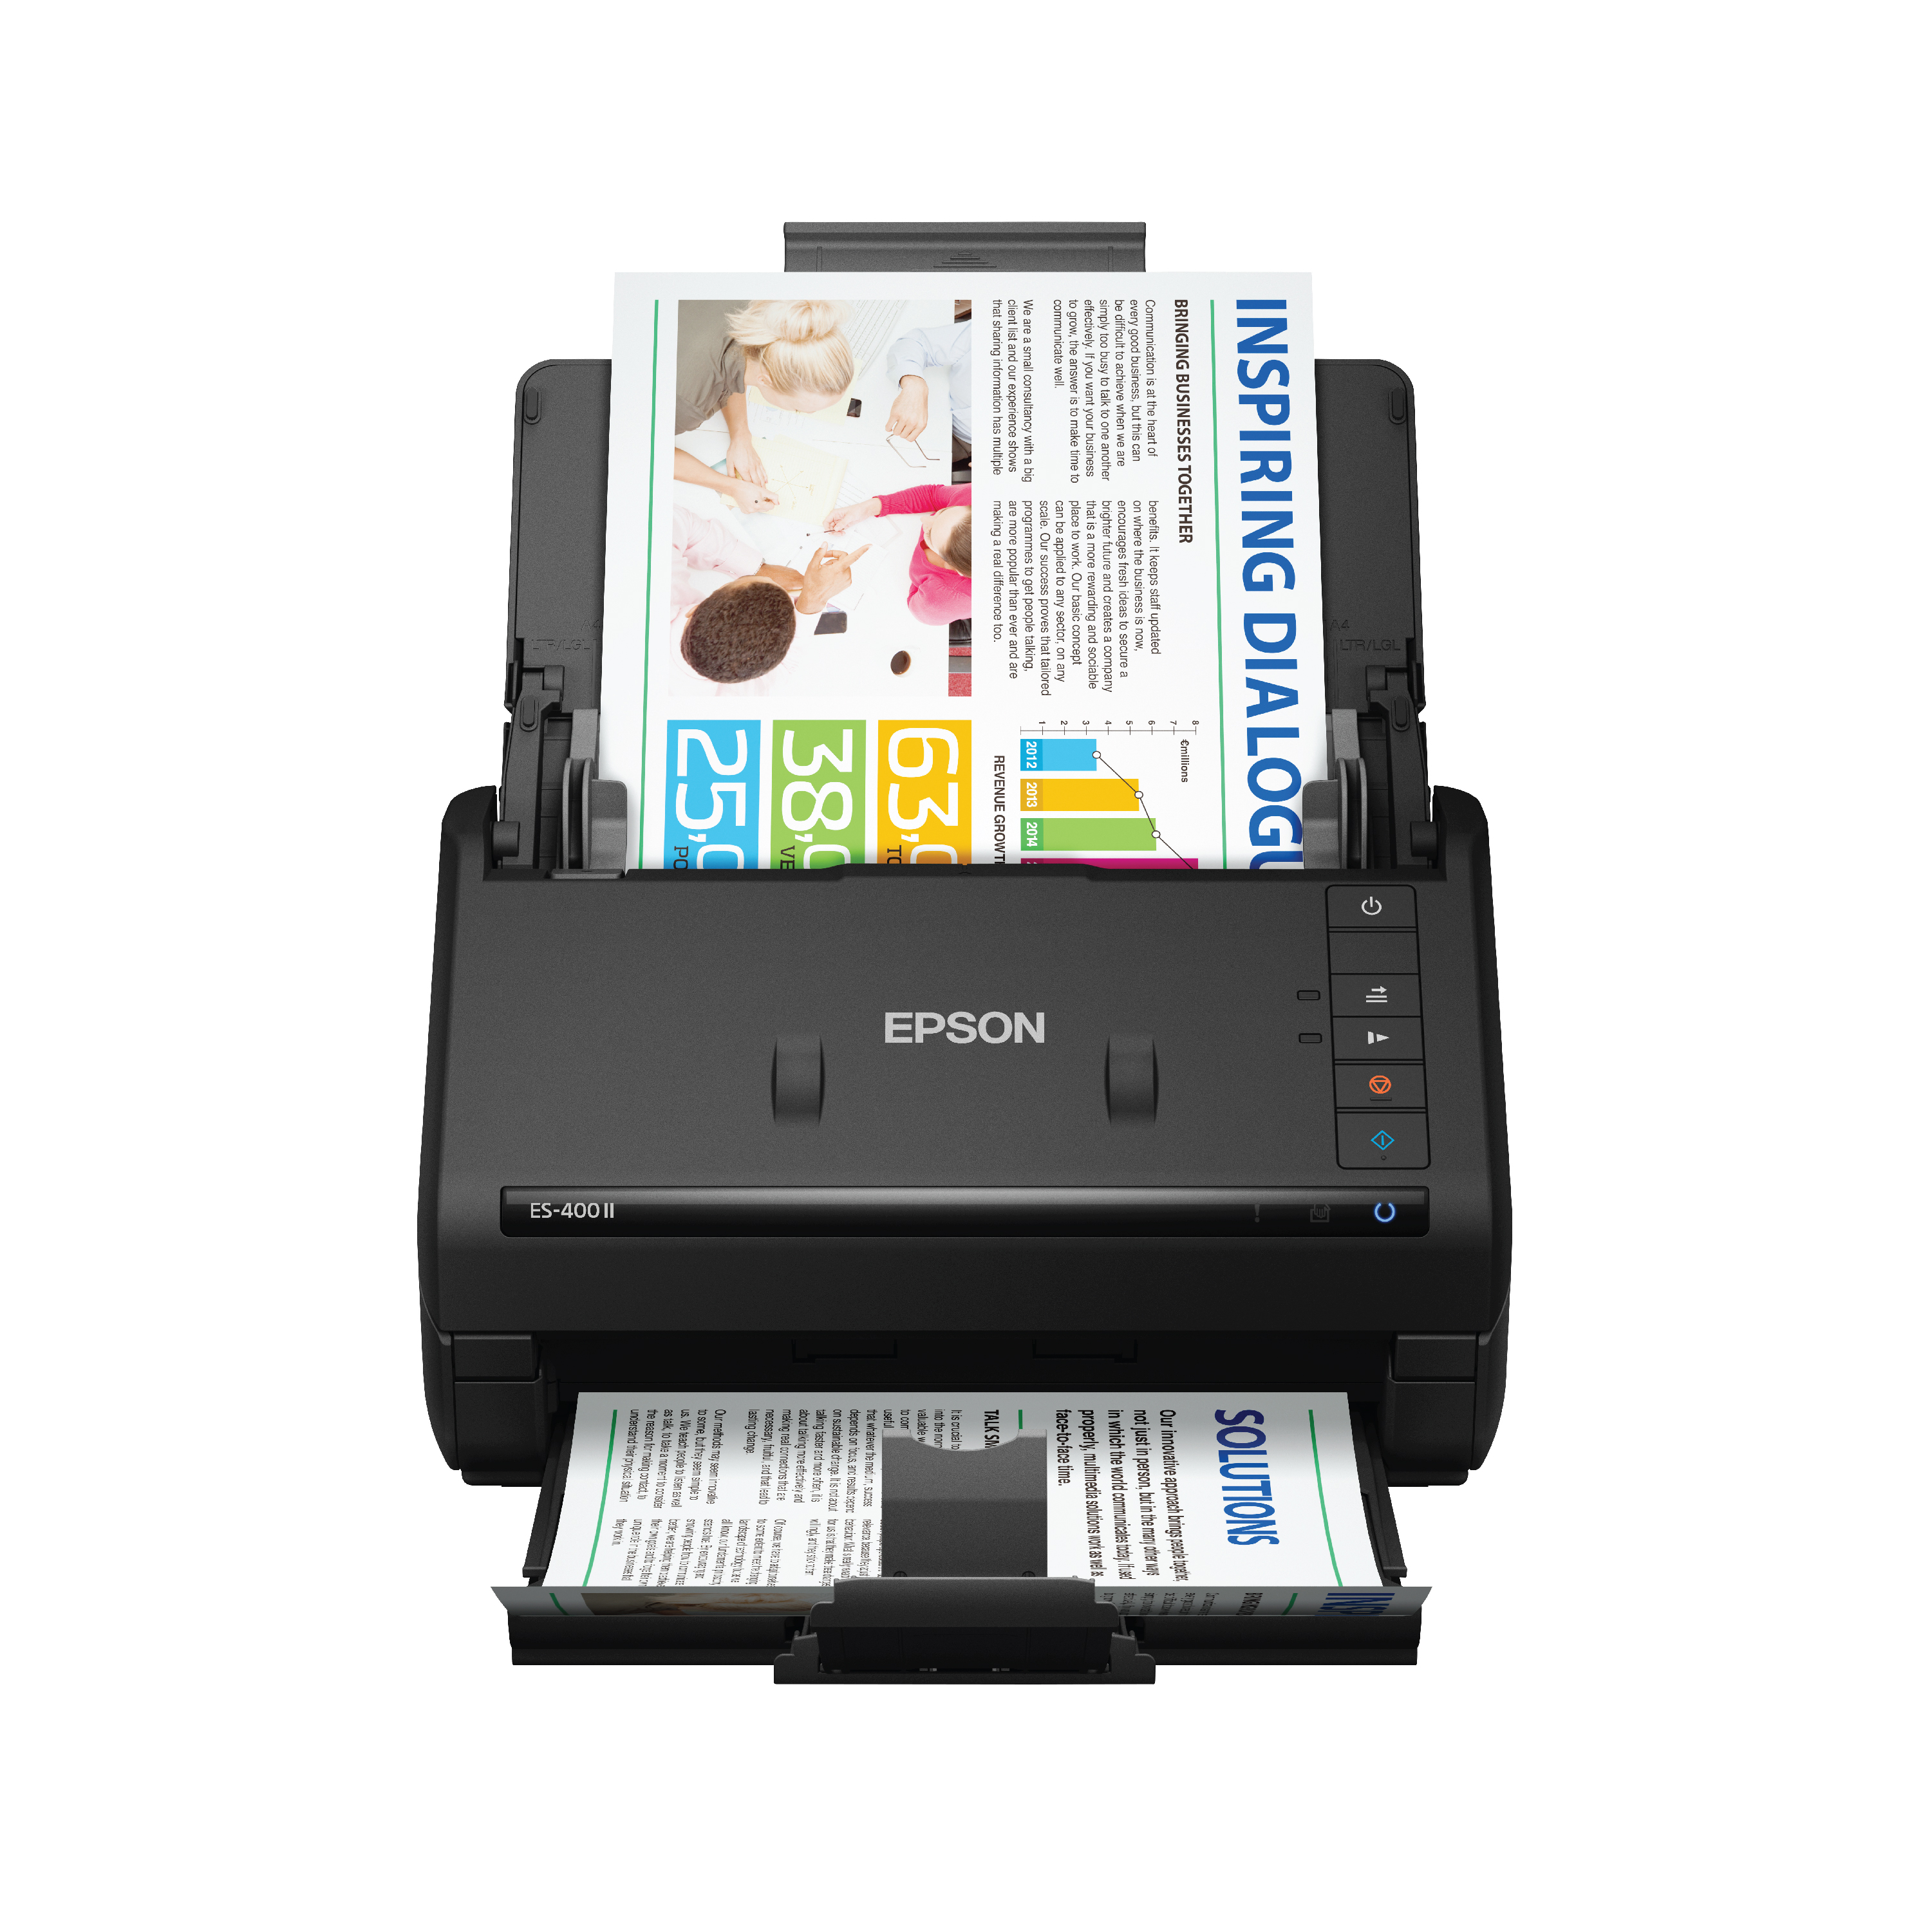 Epson WorkForce ES-400 II Color Duplex Desktop Document Scanner for PC and Mac, with Auto Document Feeder (ADF) and Image Adjustment Tools - image 1 of 8